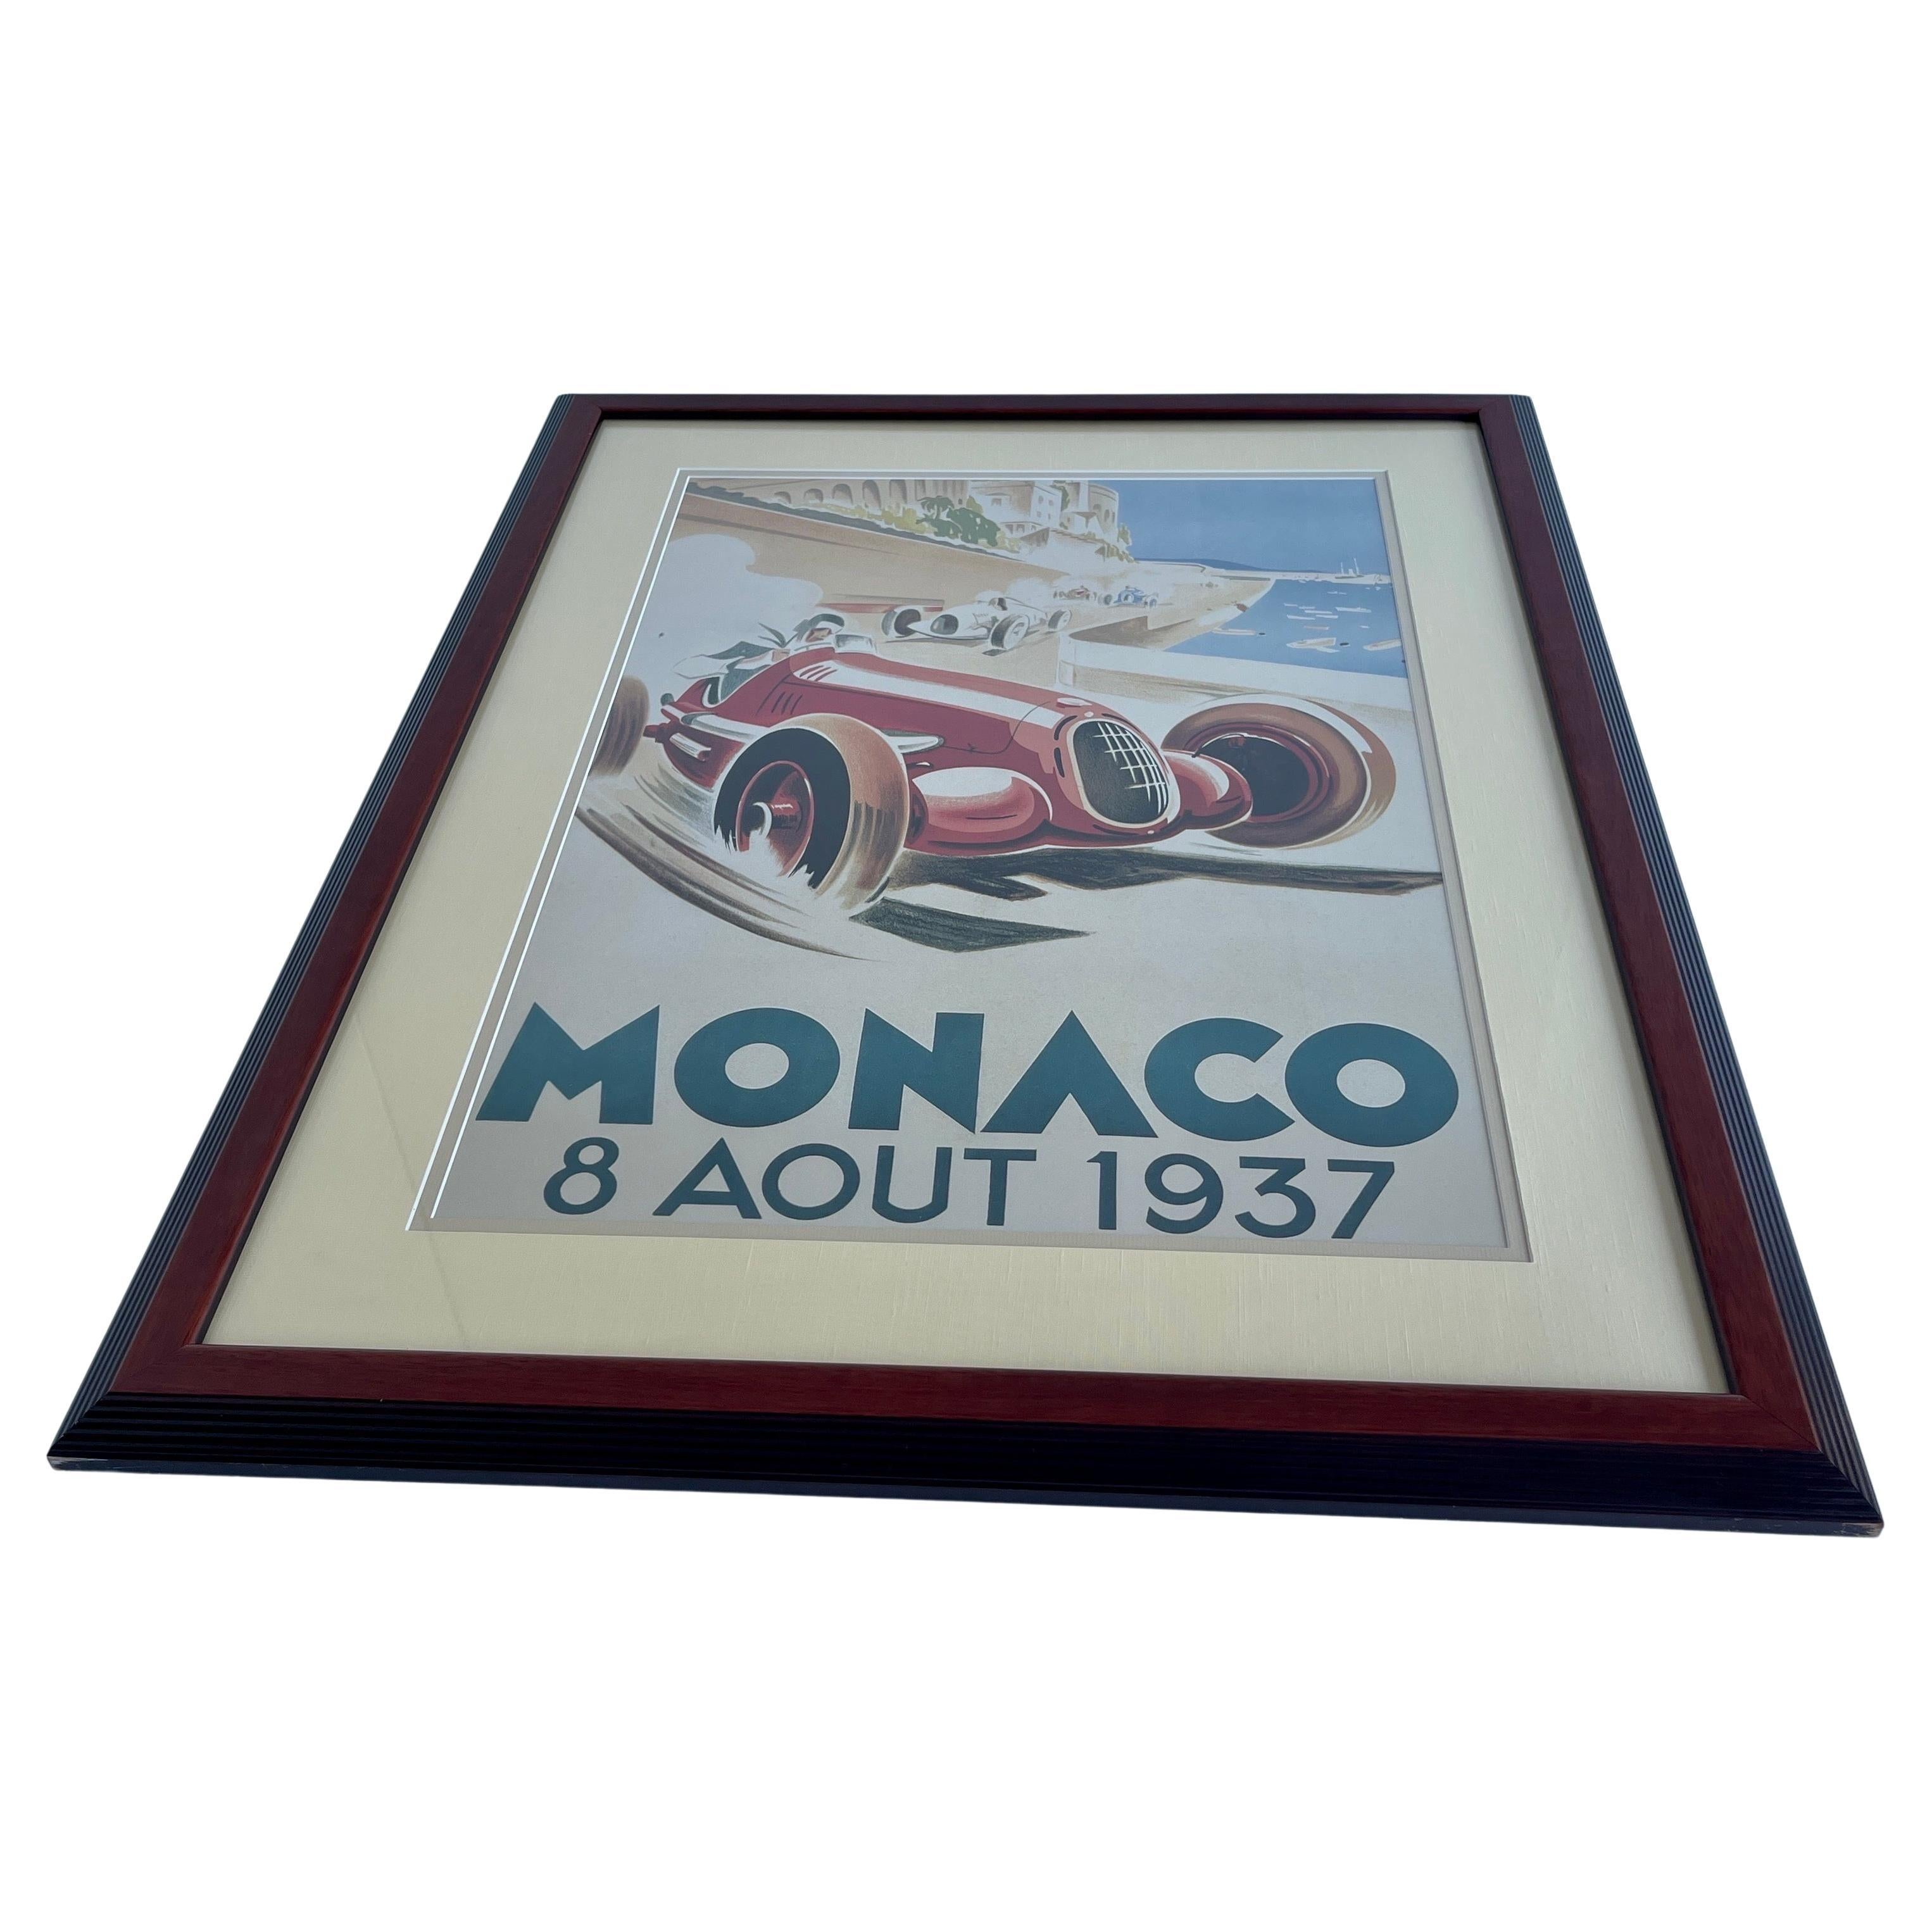 Beautiful framed poster of the August 8th 1937 Grand Prix de Monaco. The poster is a later reprint, probably from the 1980's. The poster is installed in a double matted installation, with the outer larger matte in in a light linen fabric. The